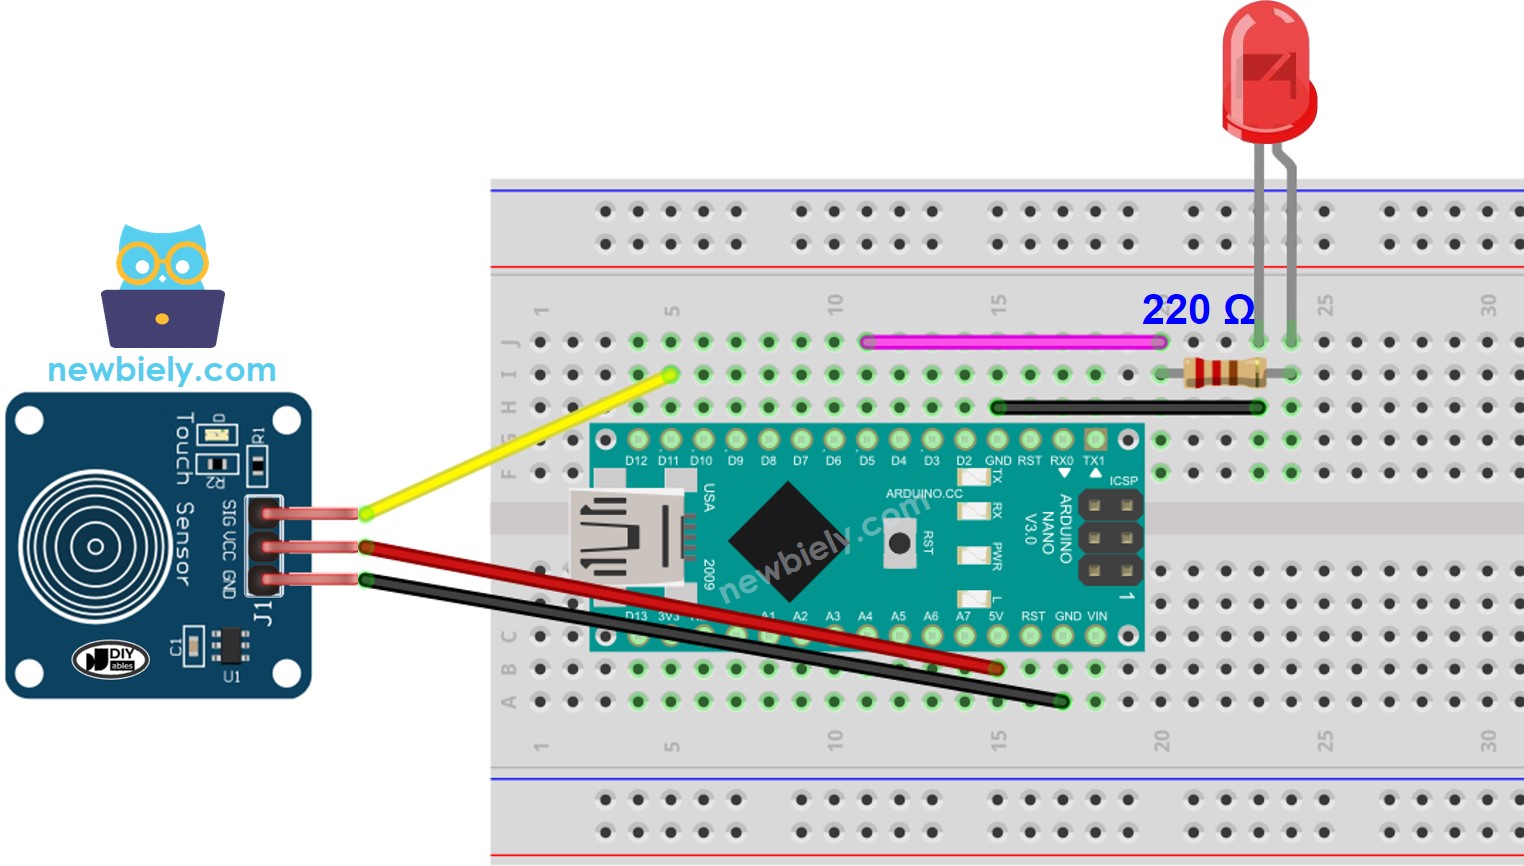 The wiring diagram between Arduino Nano and touch sensor LED